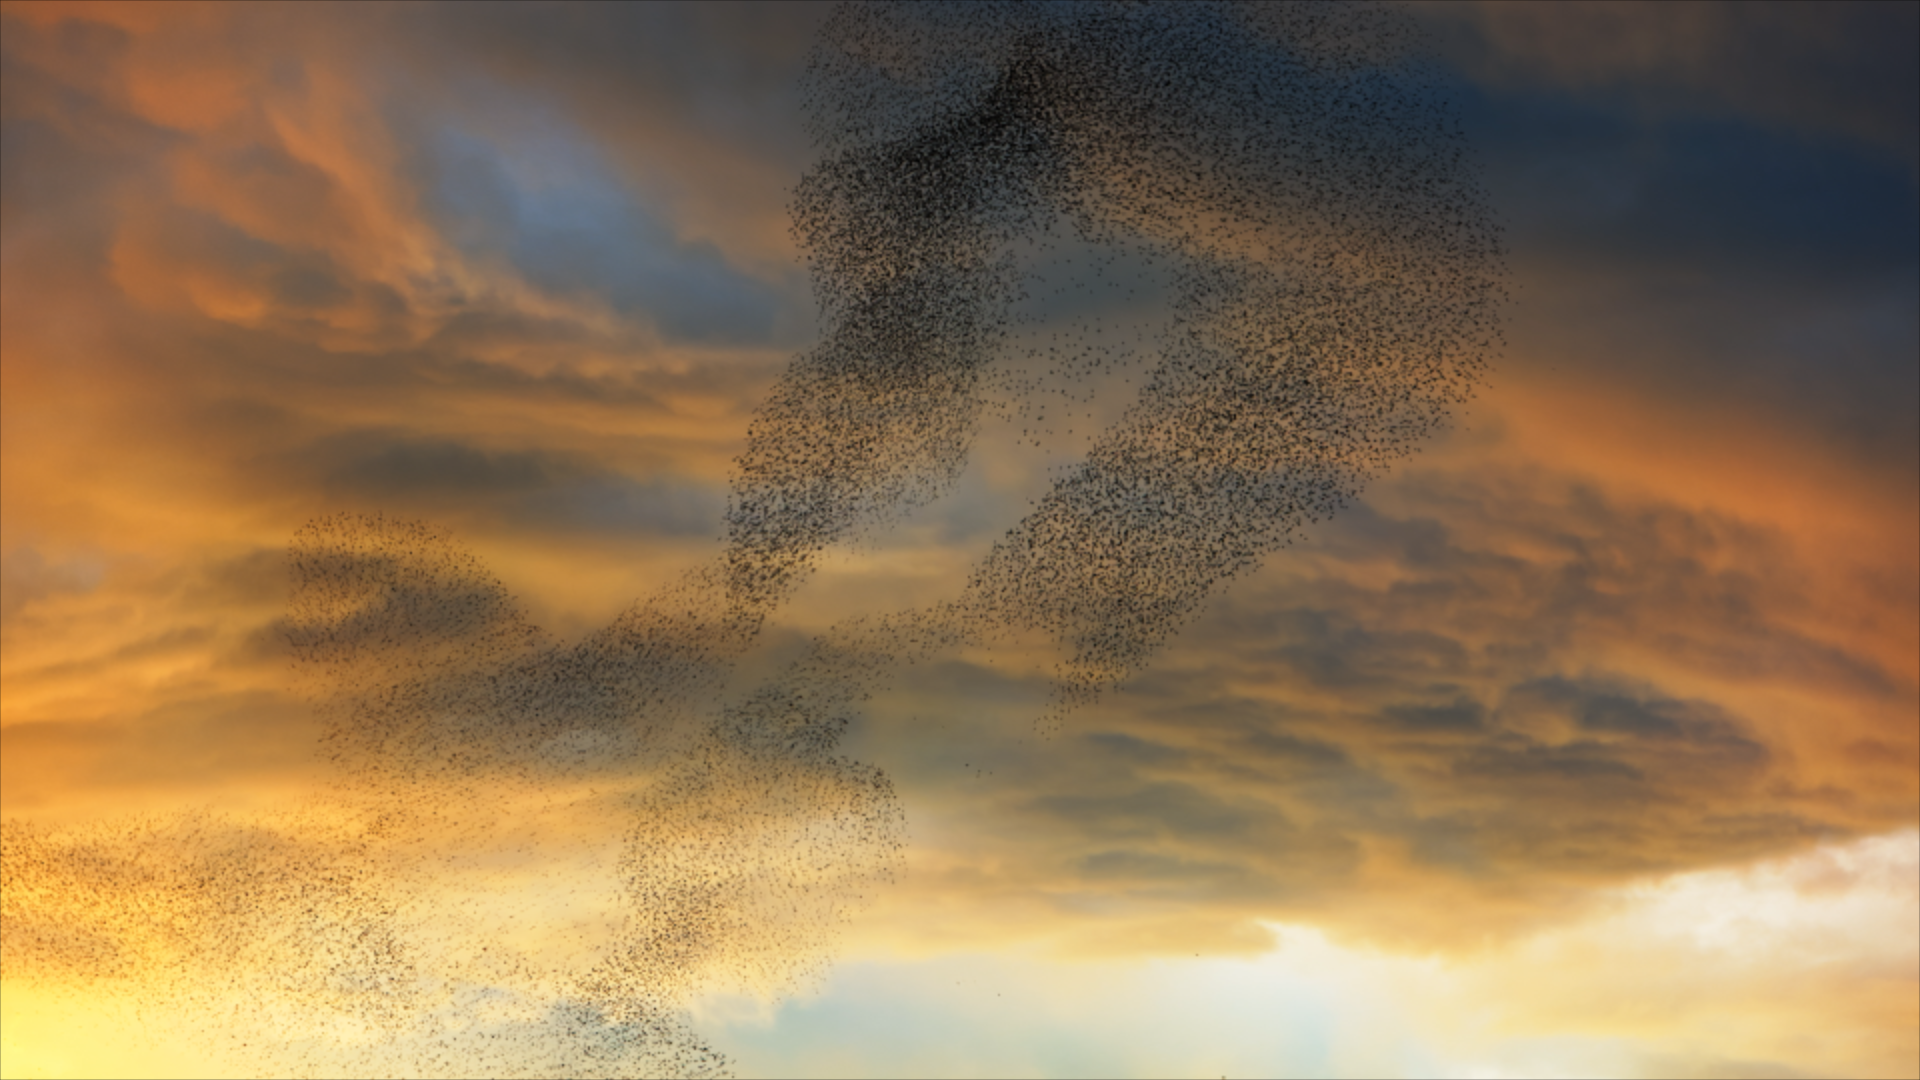 flock of birds flying together in the sky